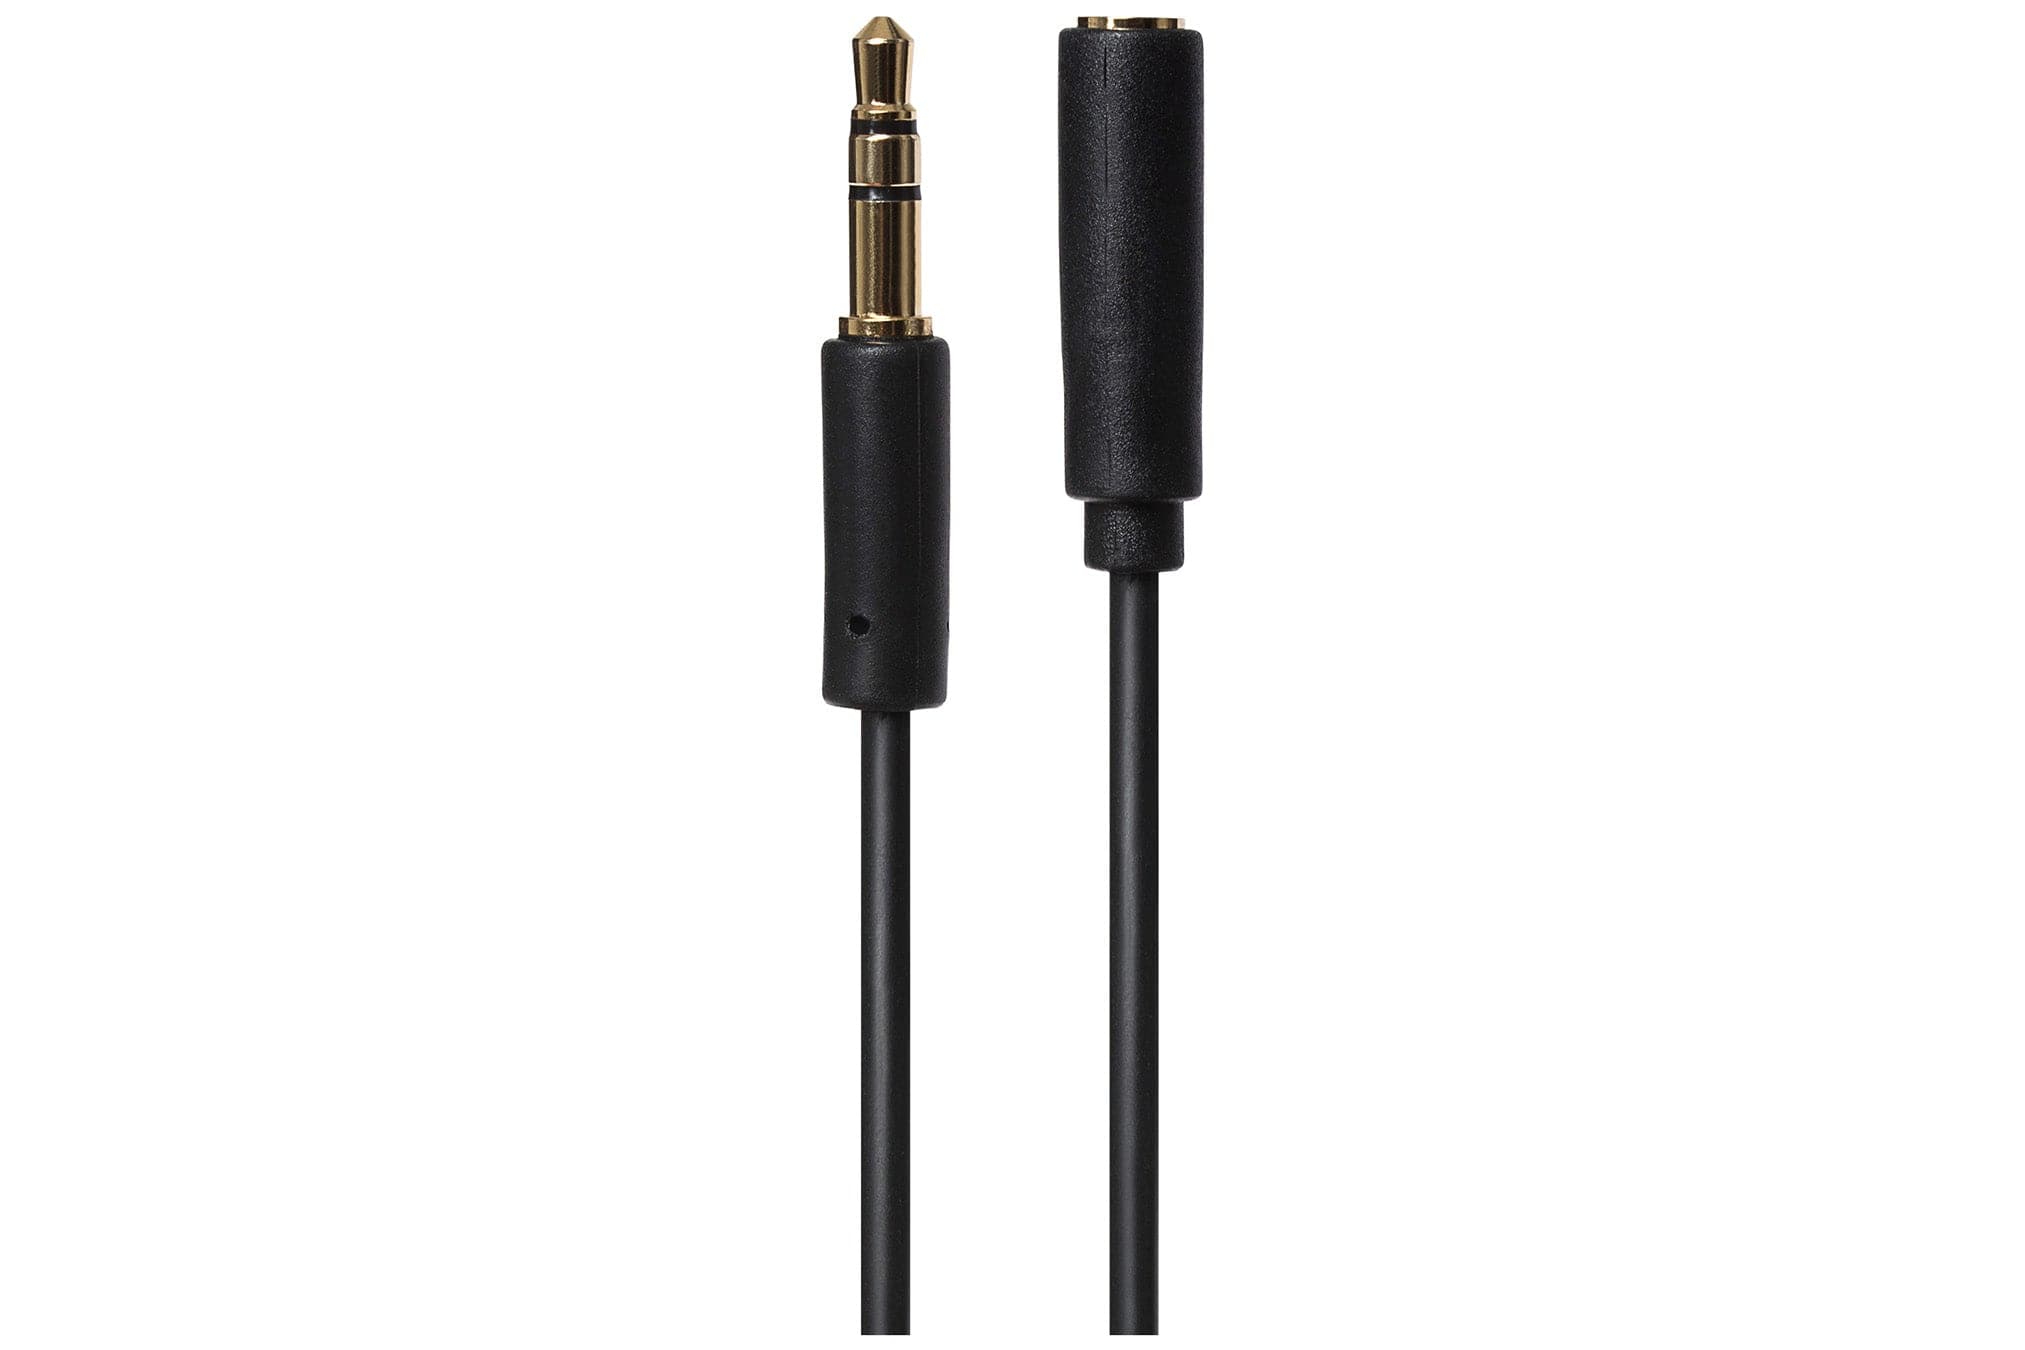 Maplin 3.5mm Aux Stereo 3-Pole Jack Plug to 3.5mm Female Jack Extension Cable